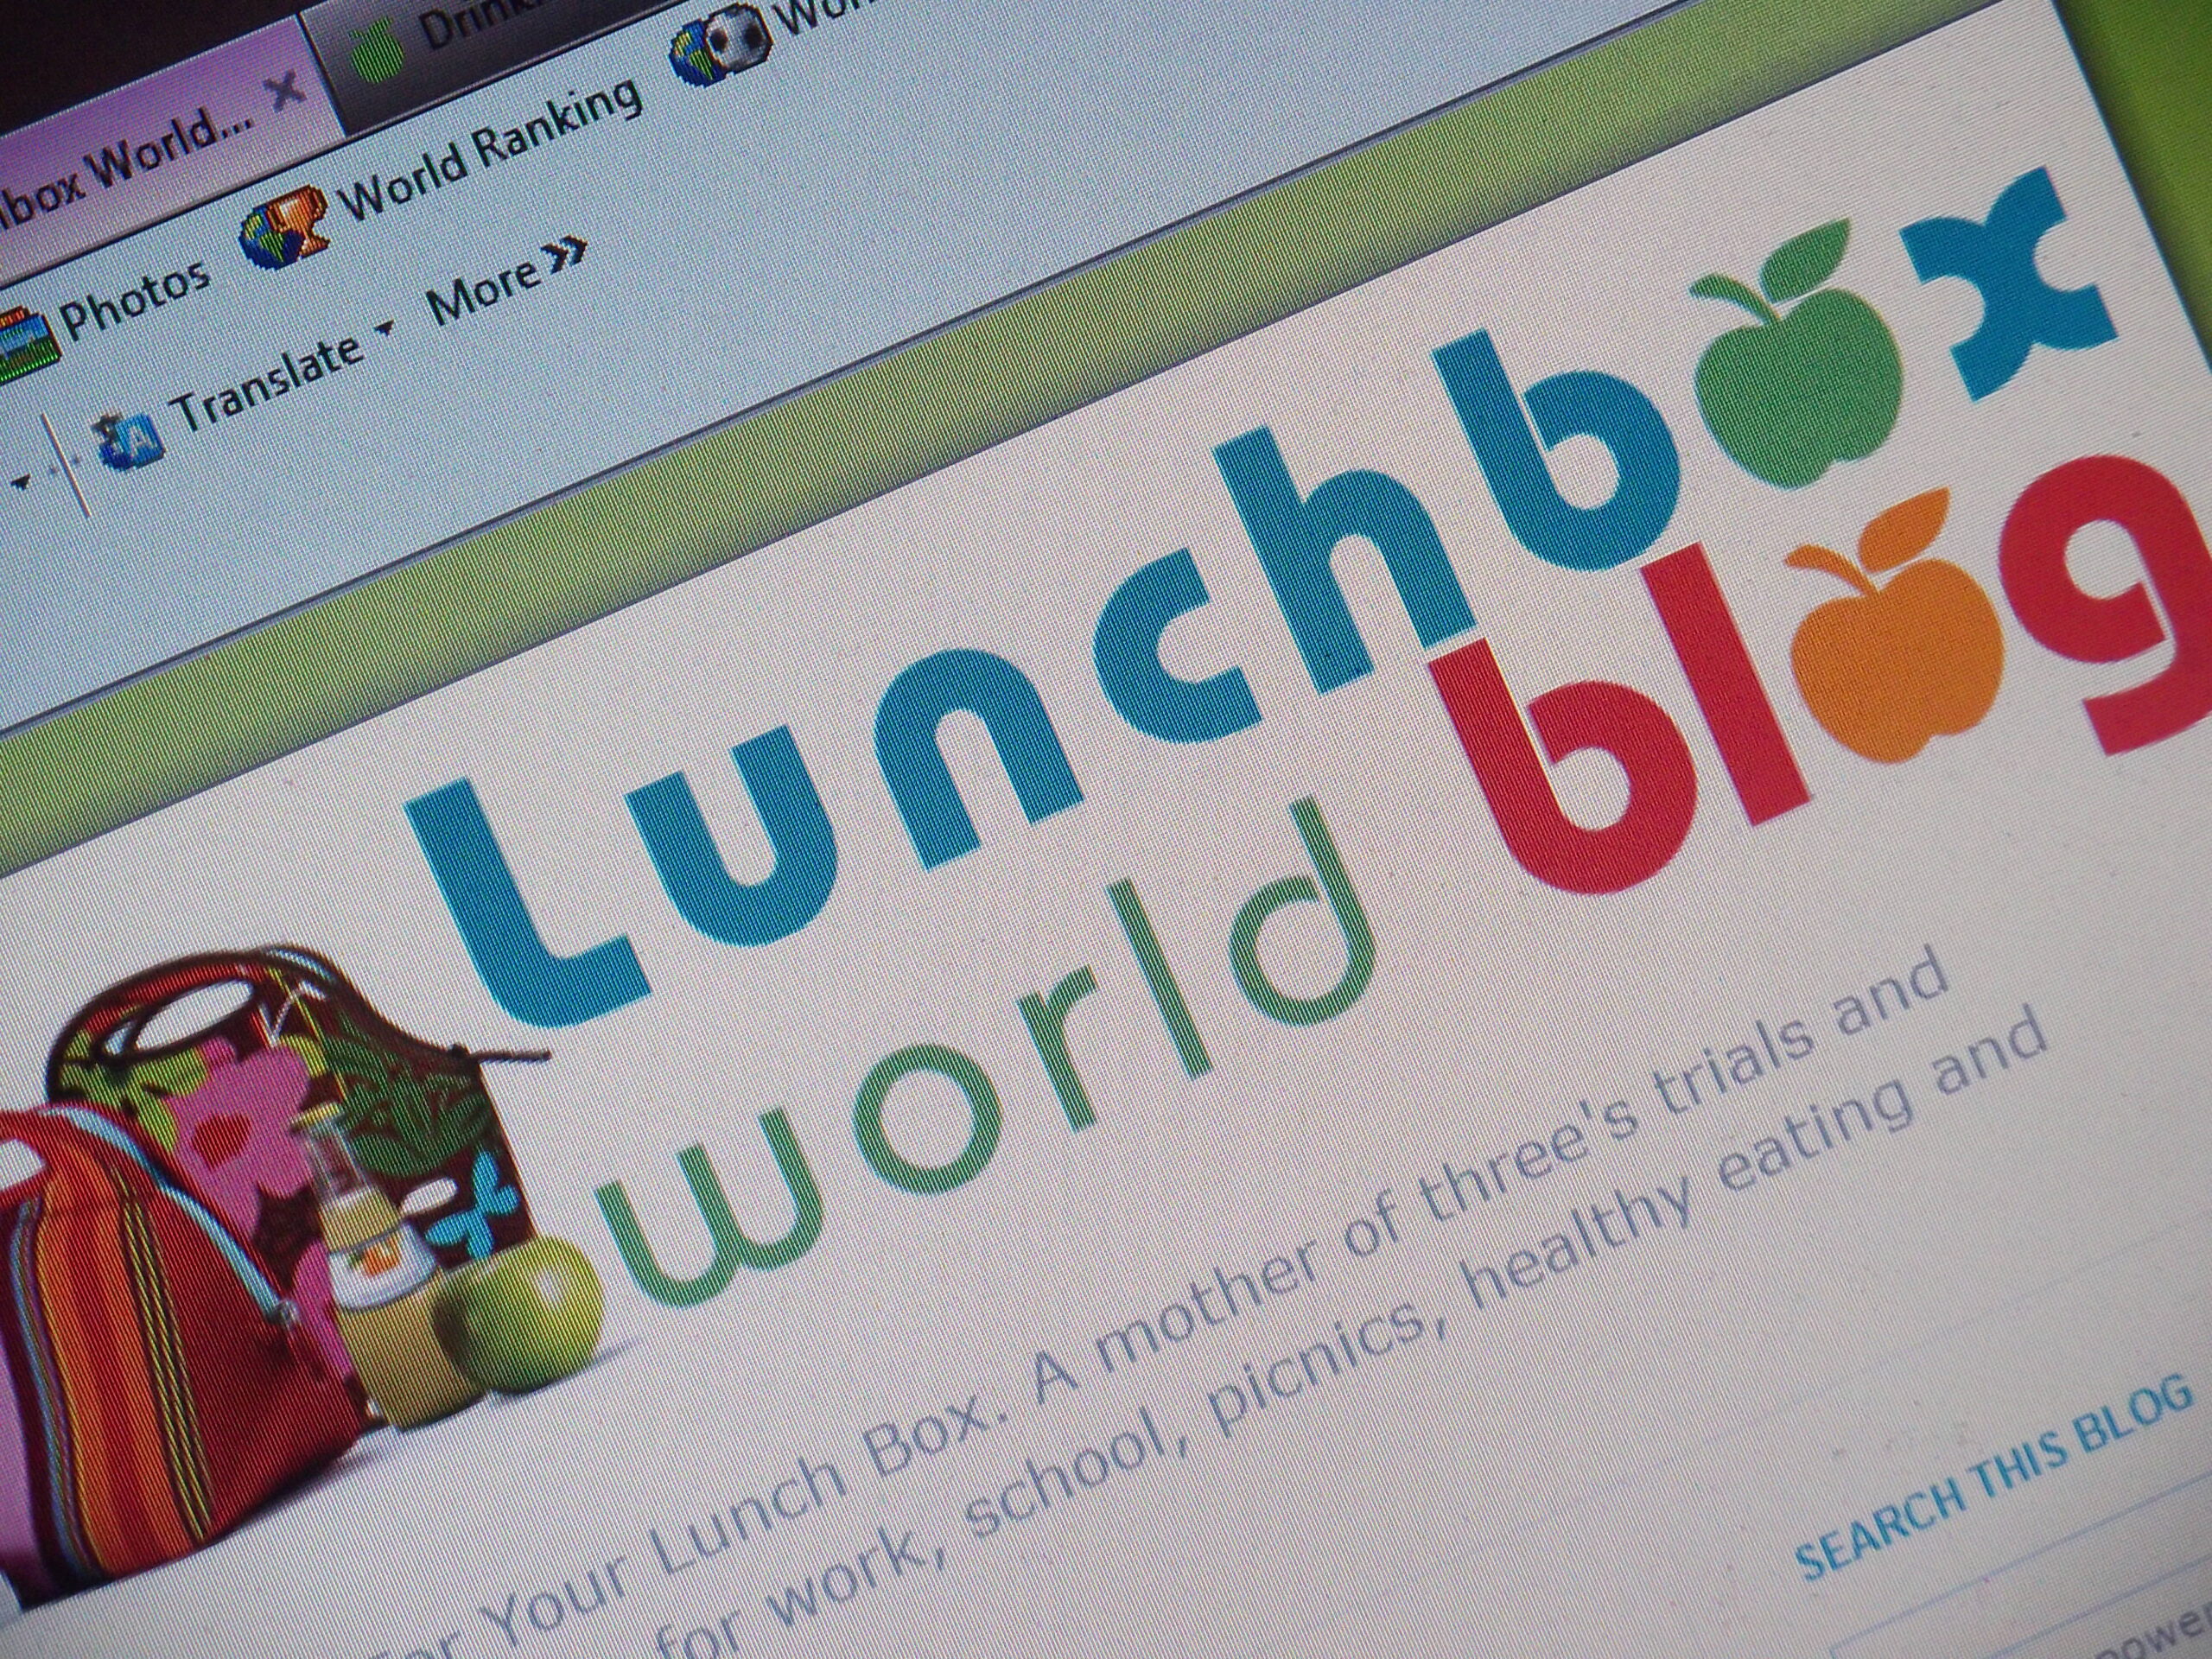 A taster of the Lunchbox World Blog